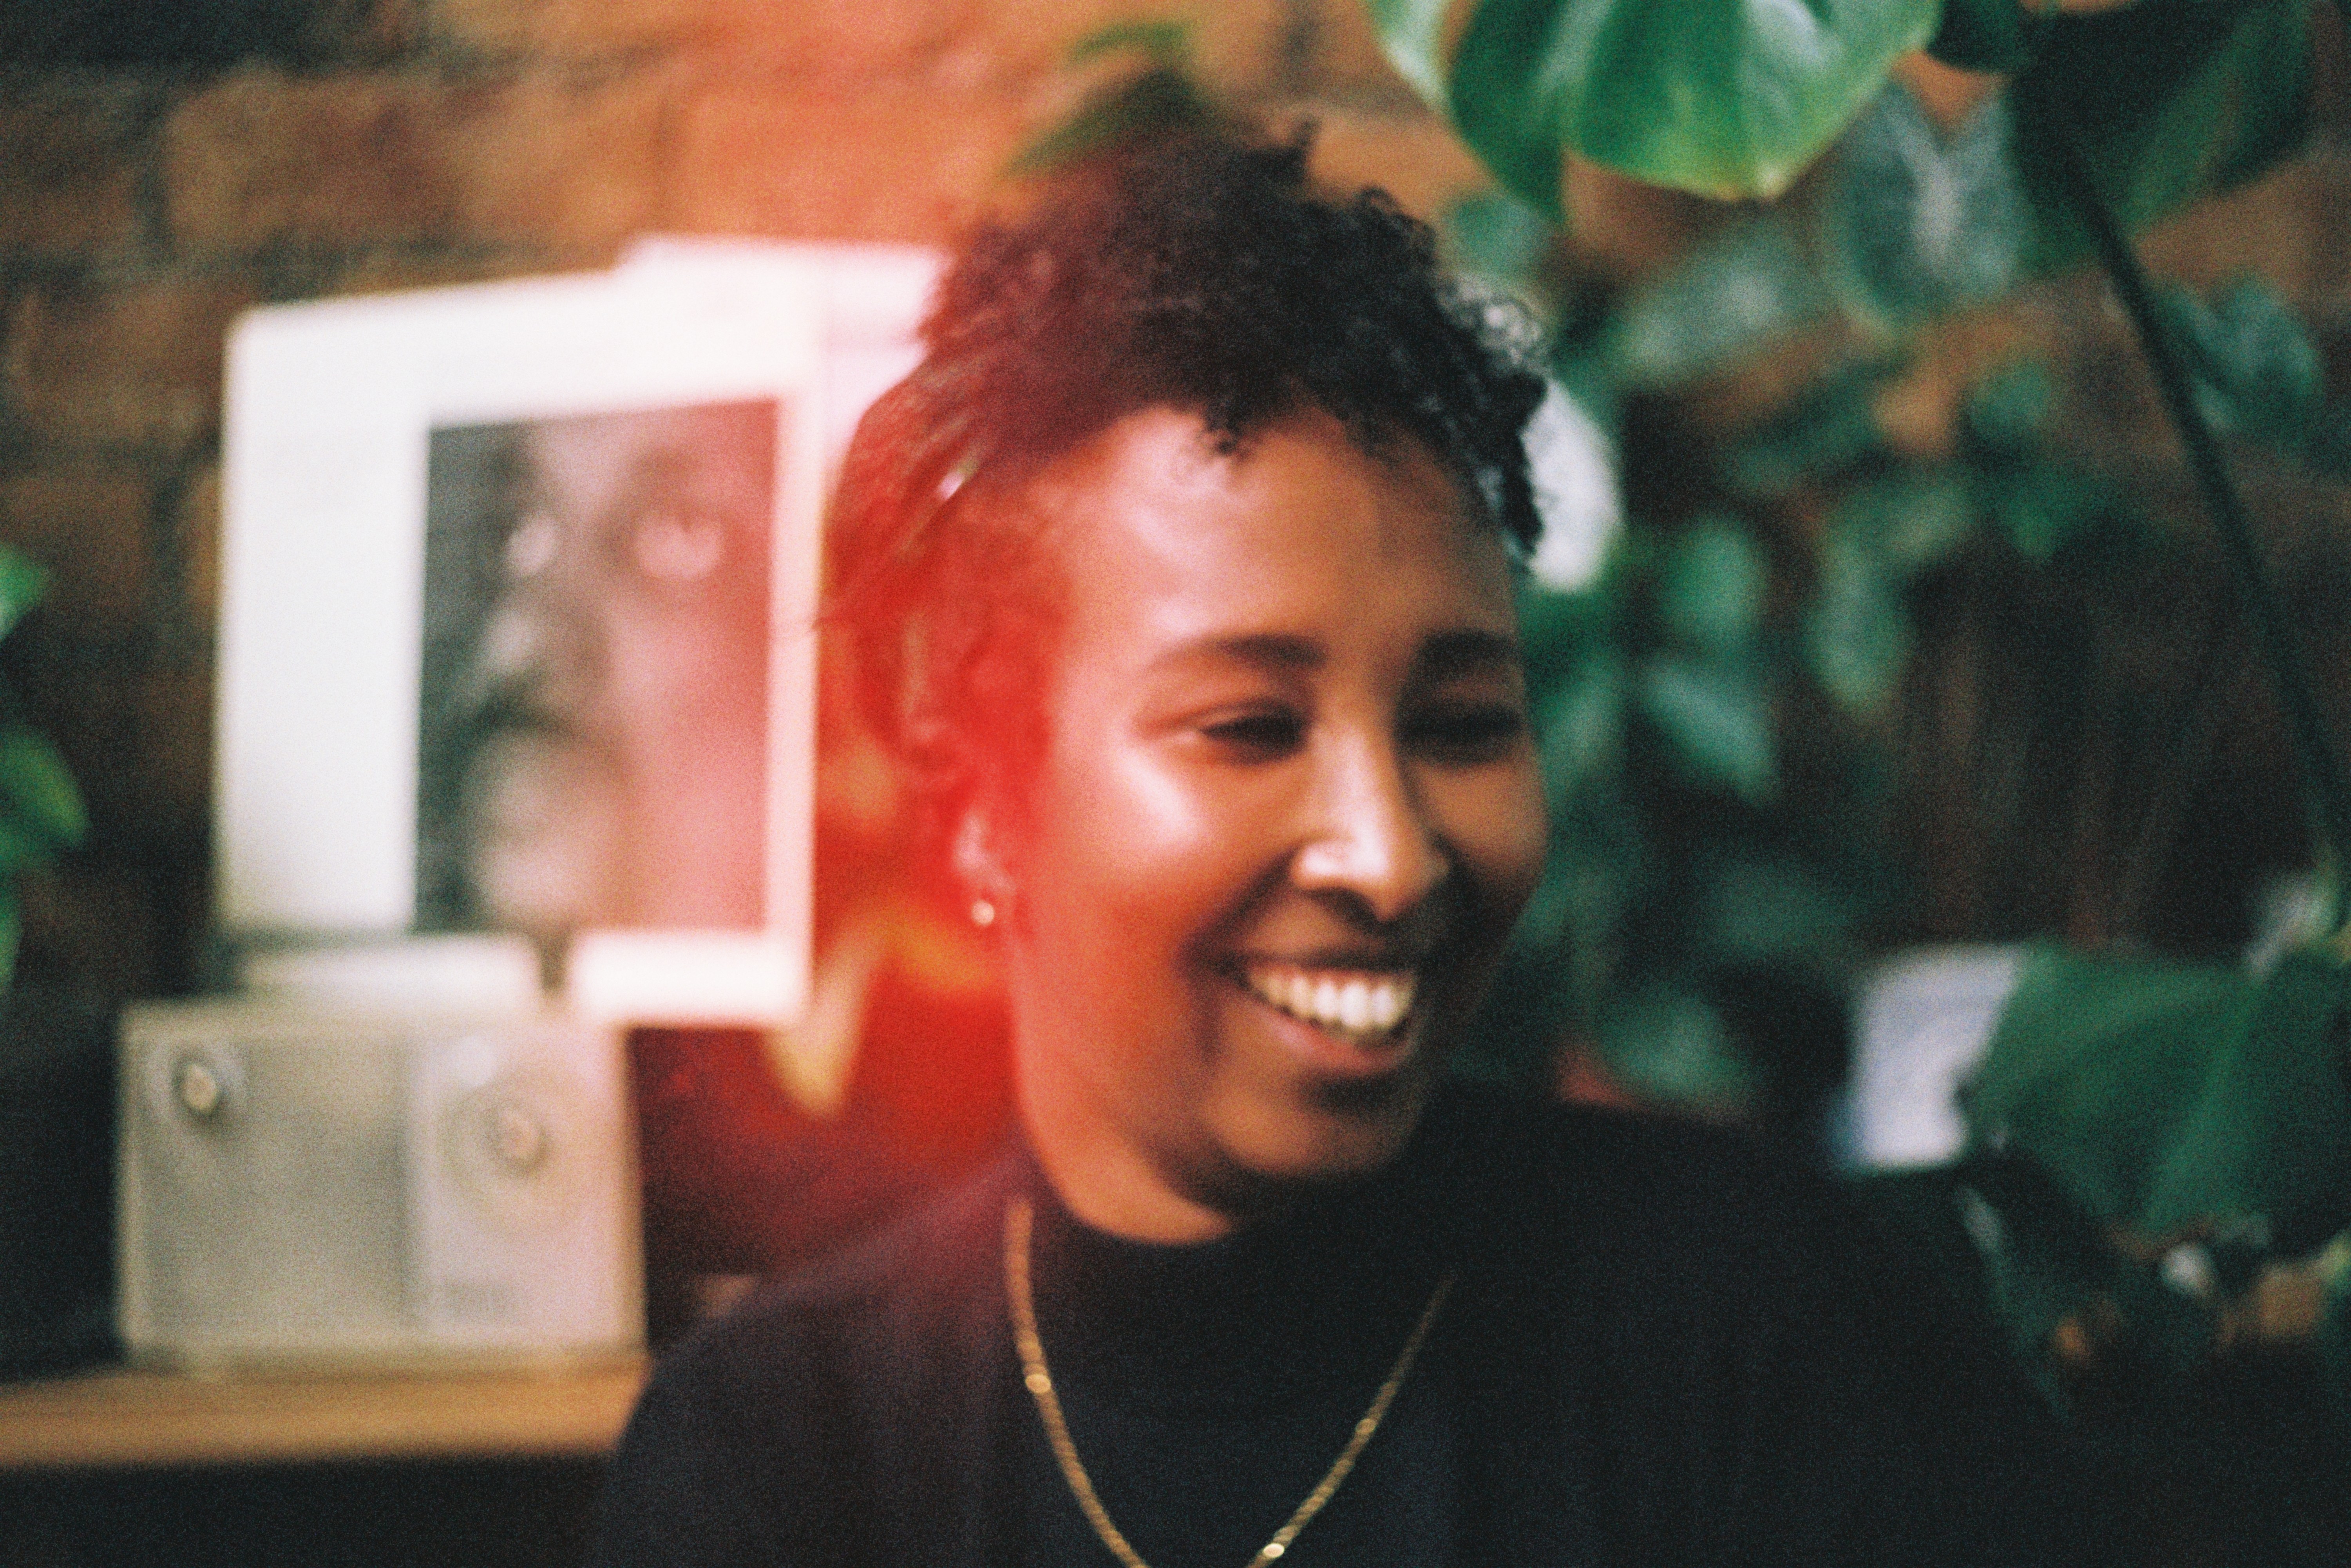 An African woman wearing a black top with a gold chain necklace is laughing looking to the right, with short curly hair tied up, sitting in a room with green leafed plants in the background that is out of focus. Behind her on the left and vinyl record sleeves and an old radio. 